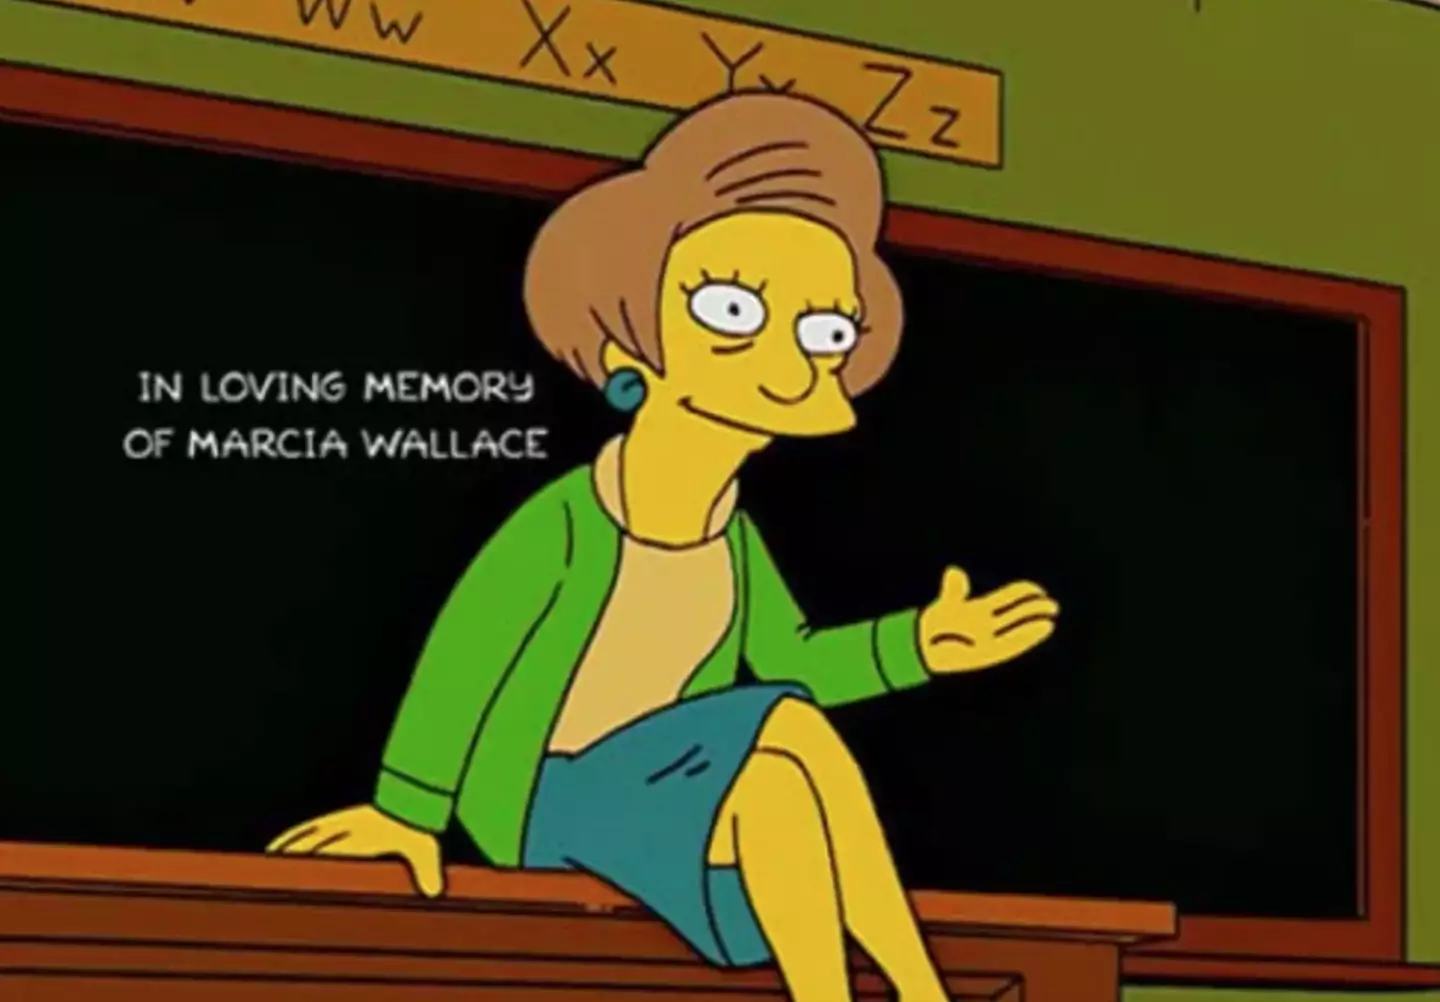 When Marcia Wallace, the voice actor behind Mrs Krabappel, died, producers decided to retire her character. (Disney)